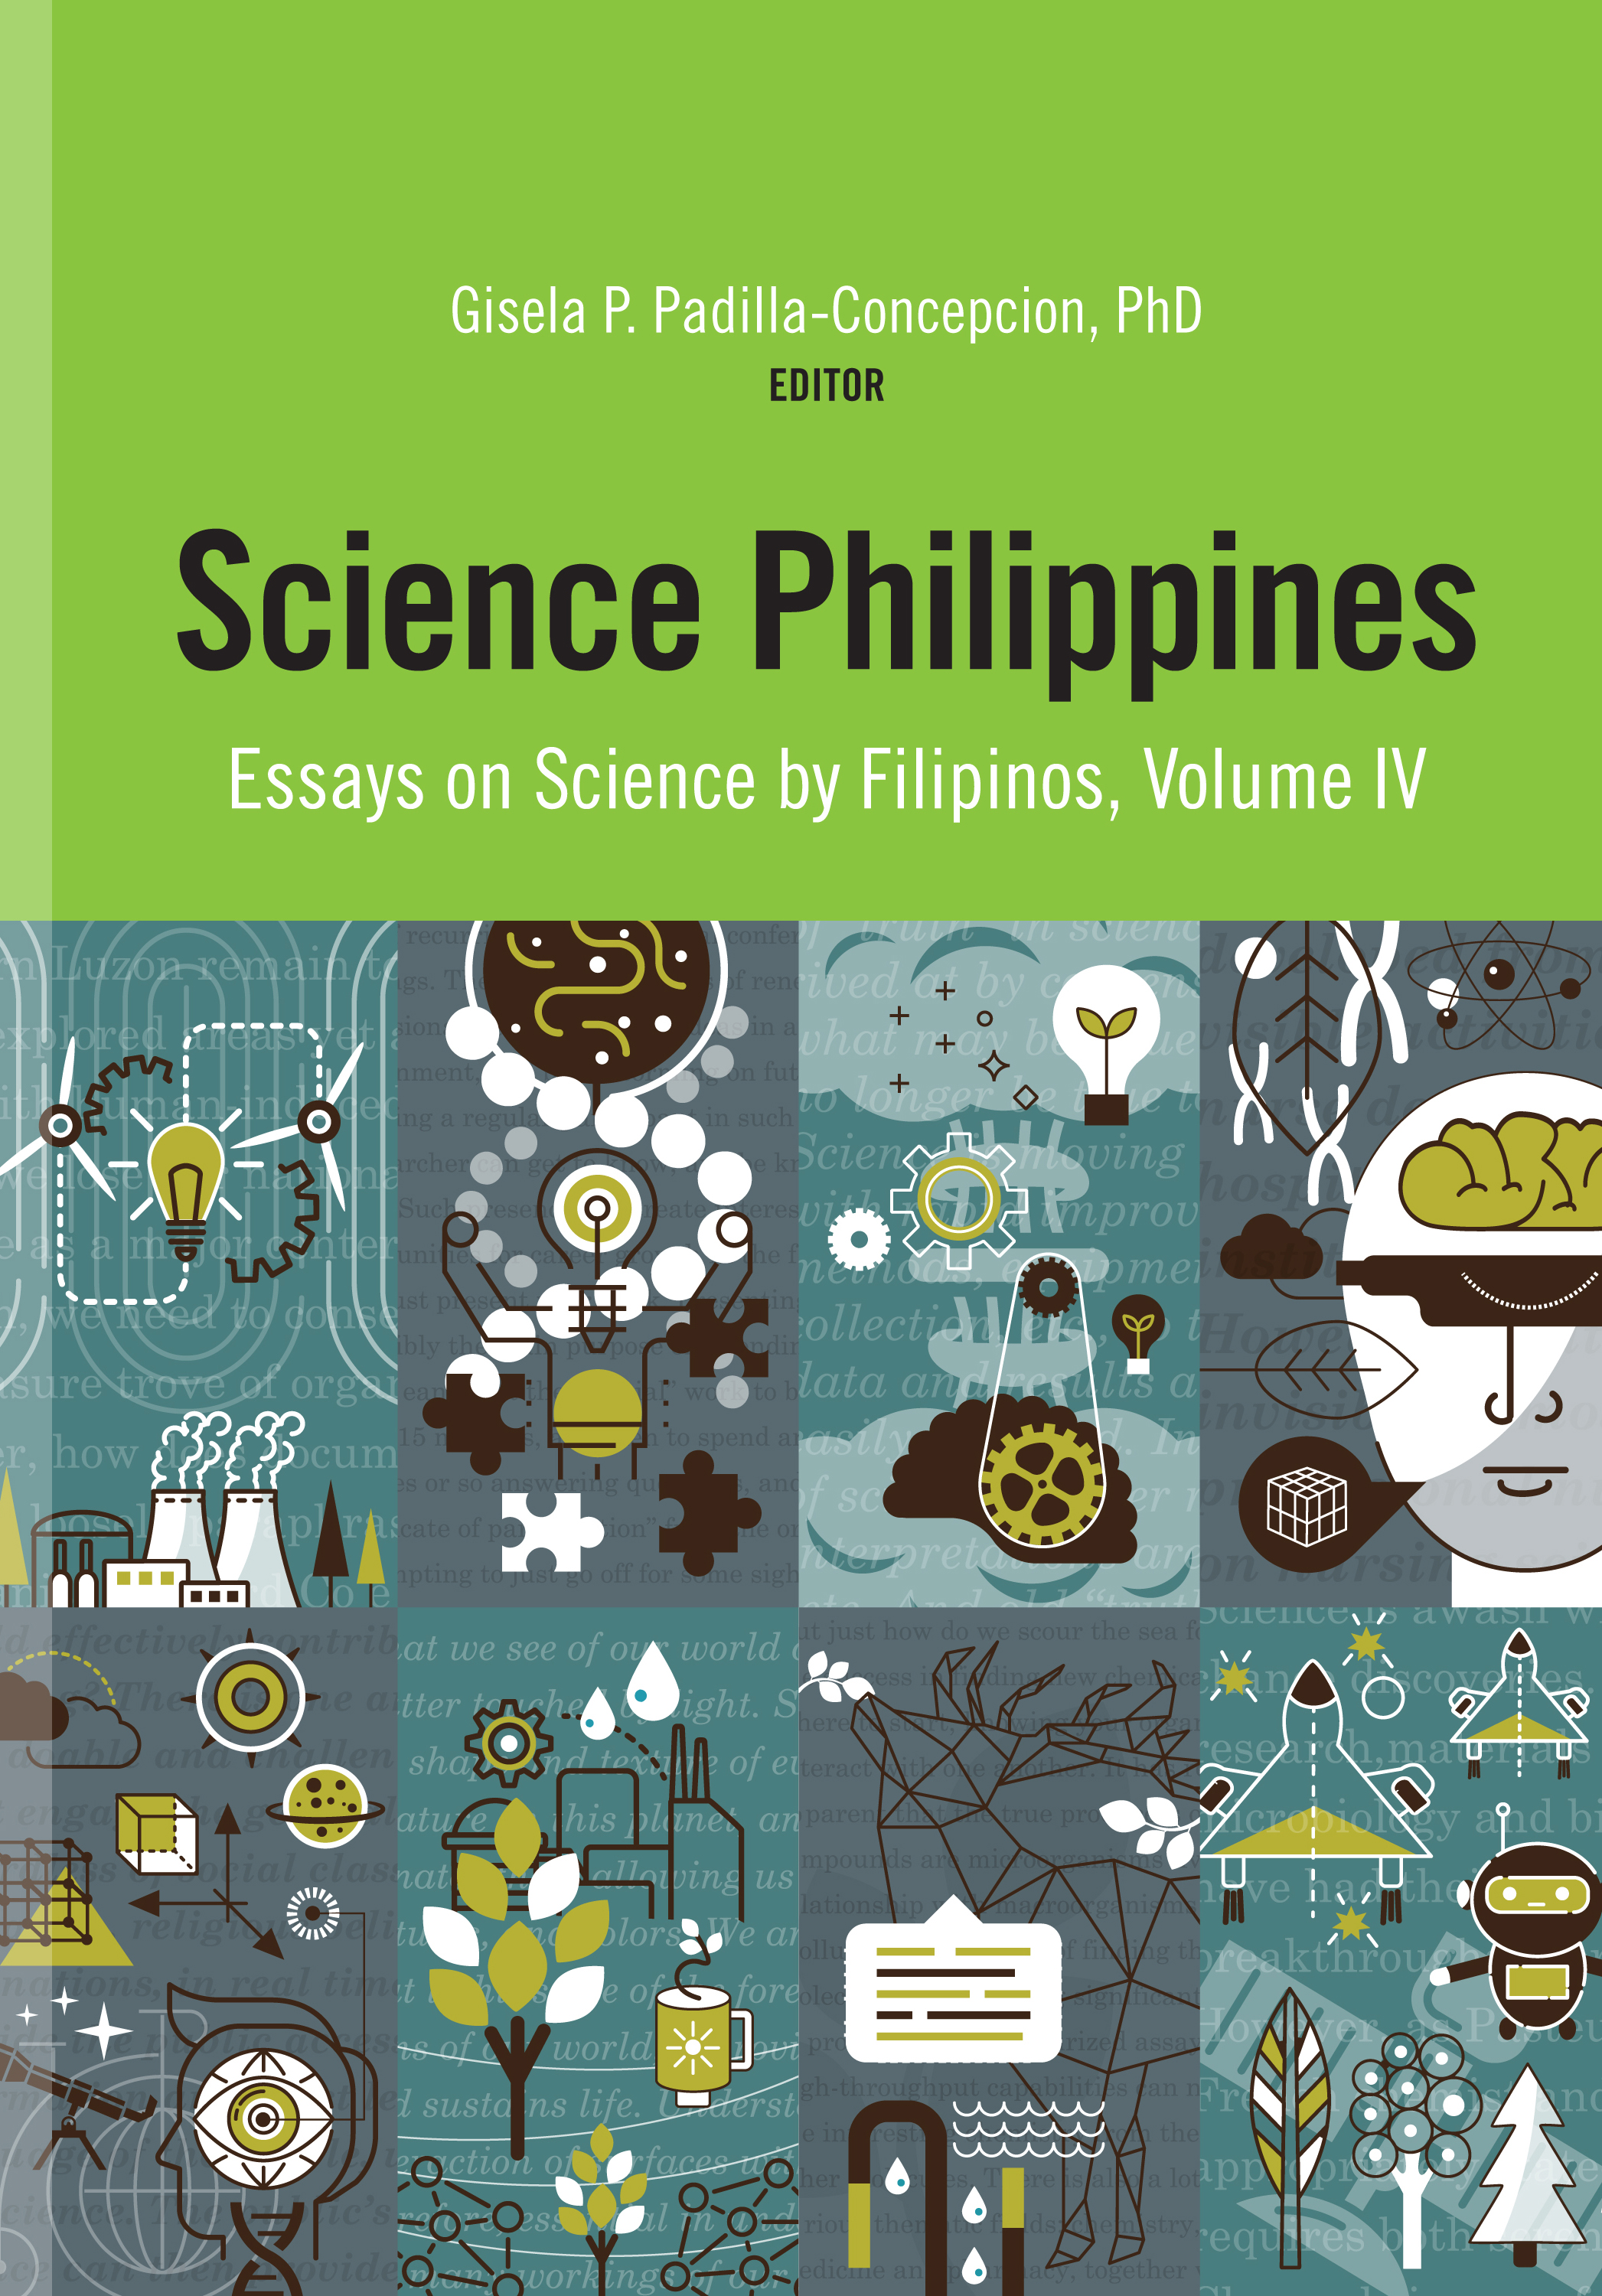 article about science education in the philippines